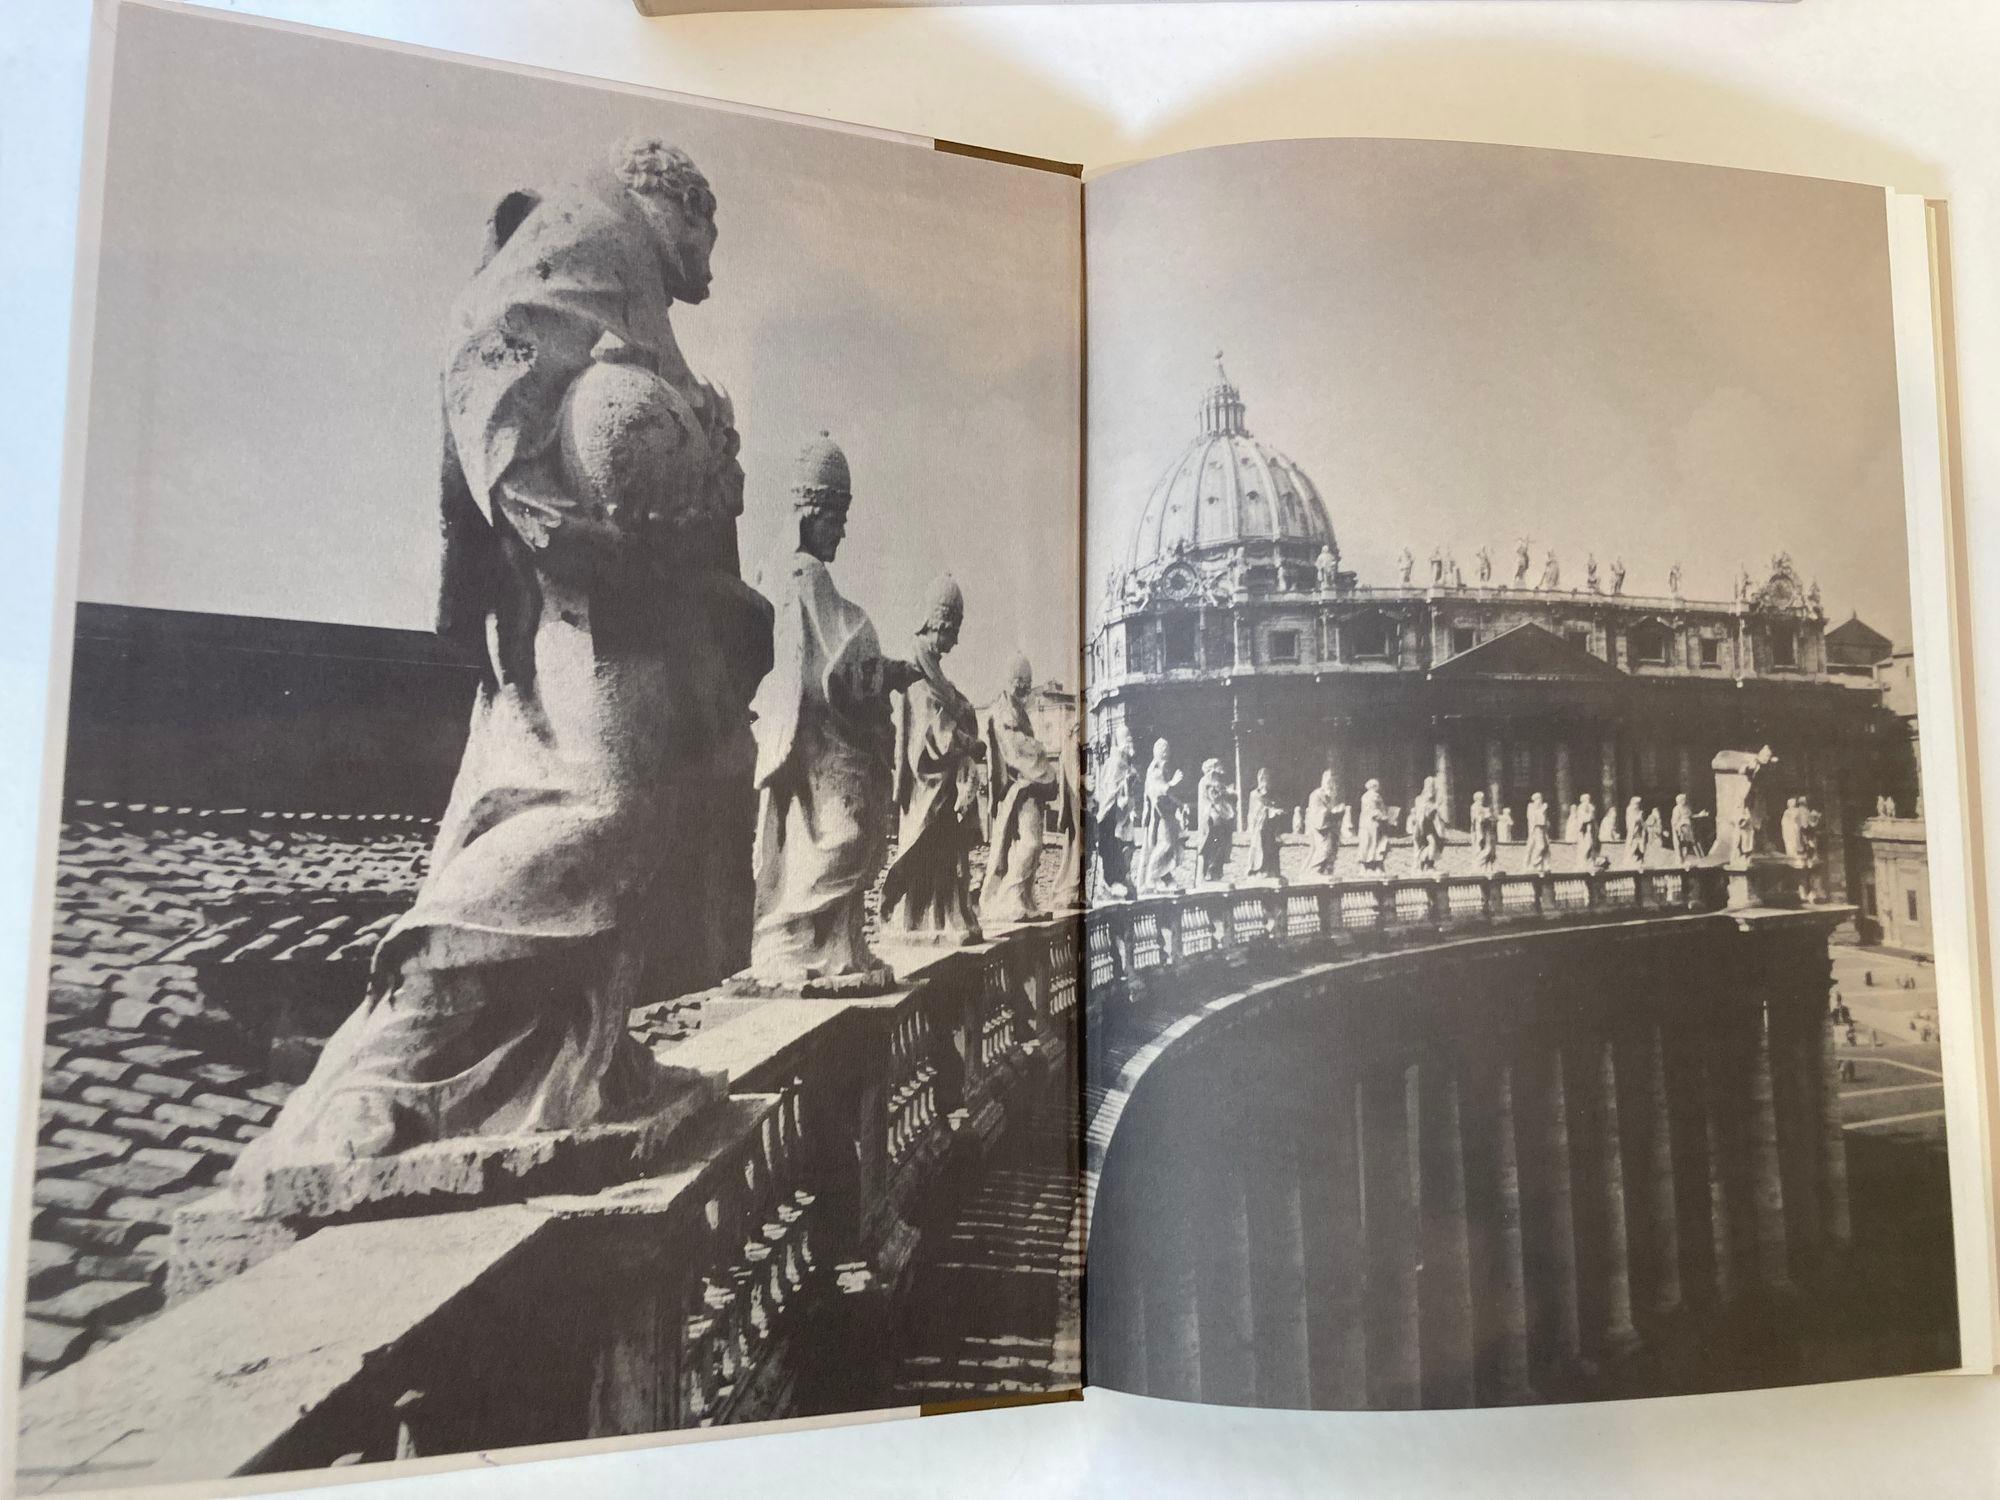 American World of Bernini 1598-1680 by Robert Wallace Hardcover Book in Sleeve For Sale